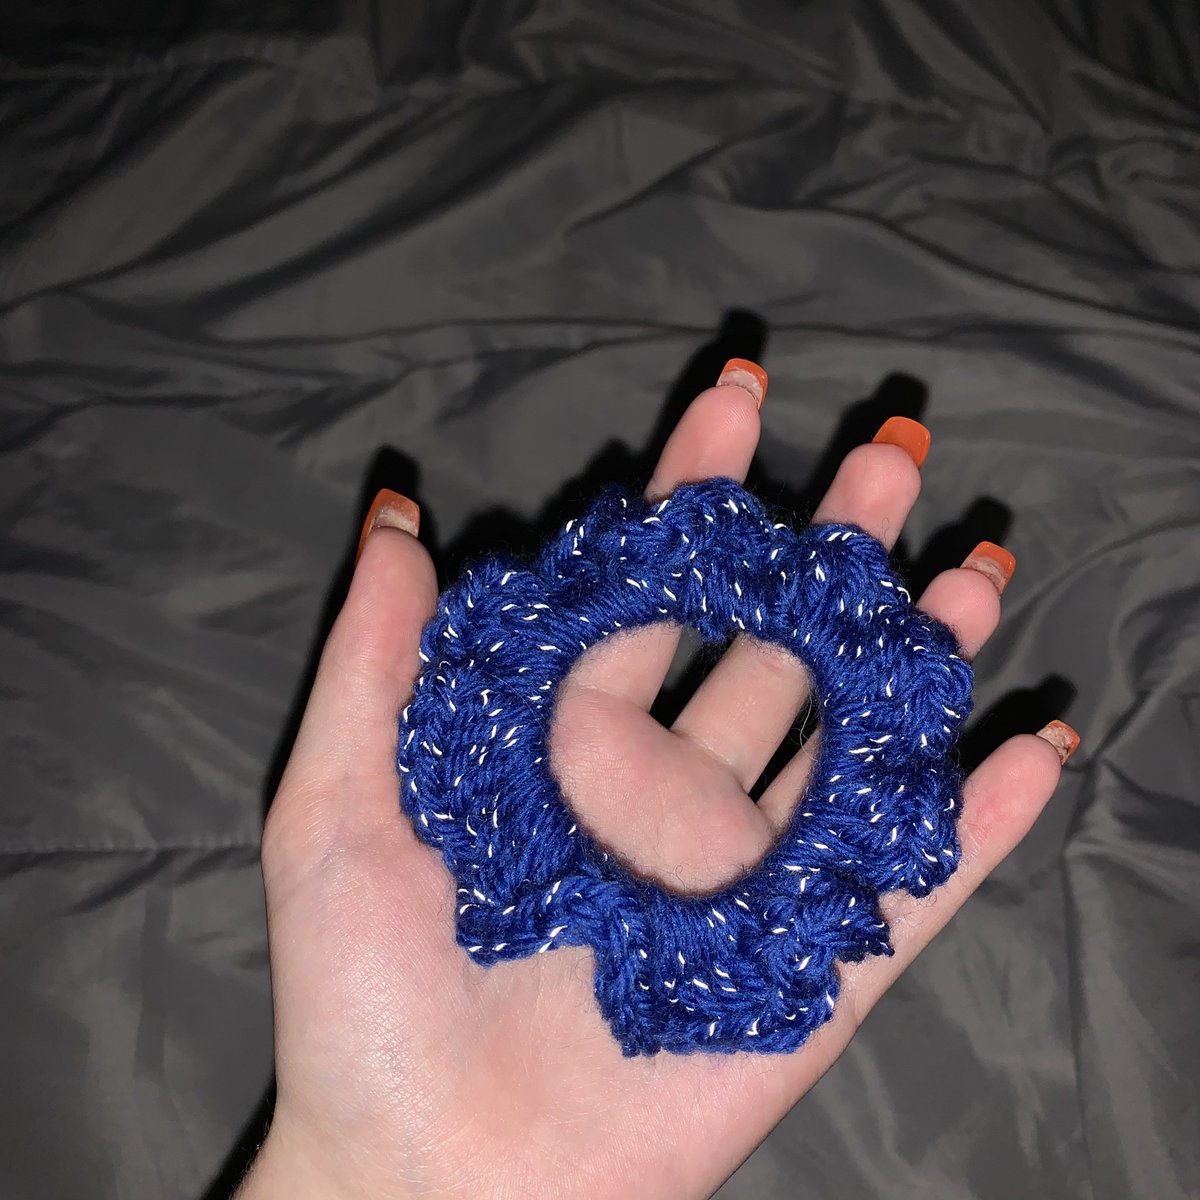 reflective scrunchies!!lowest price: CA$3 eachshipping: CA$5